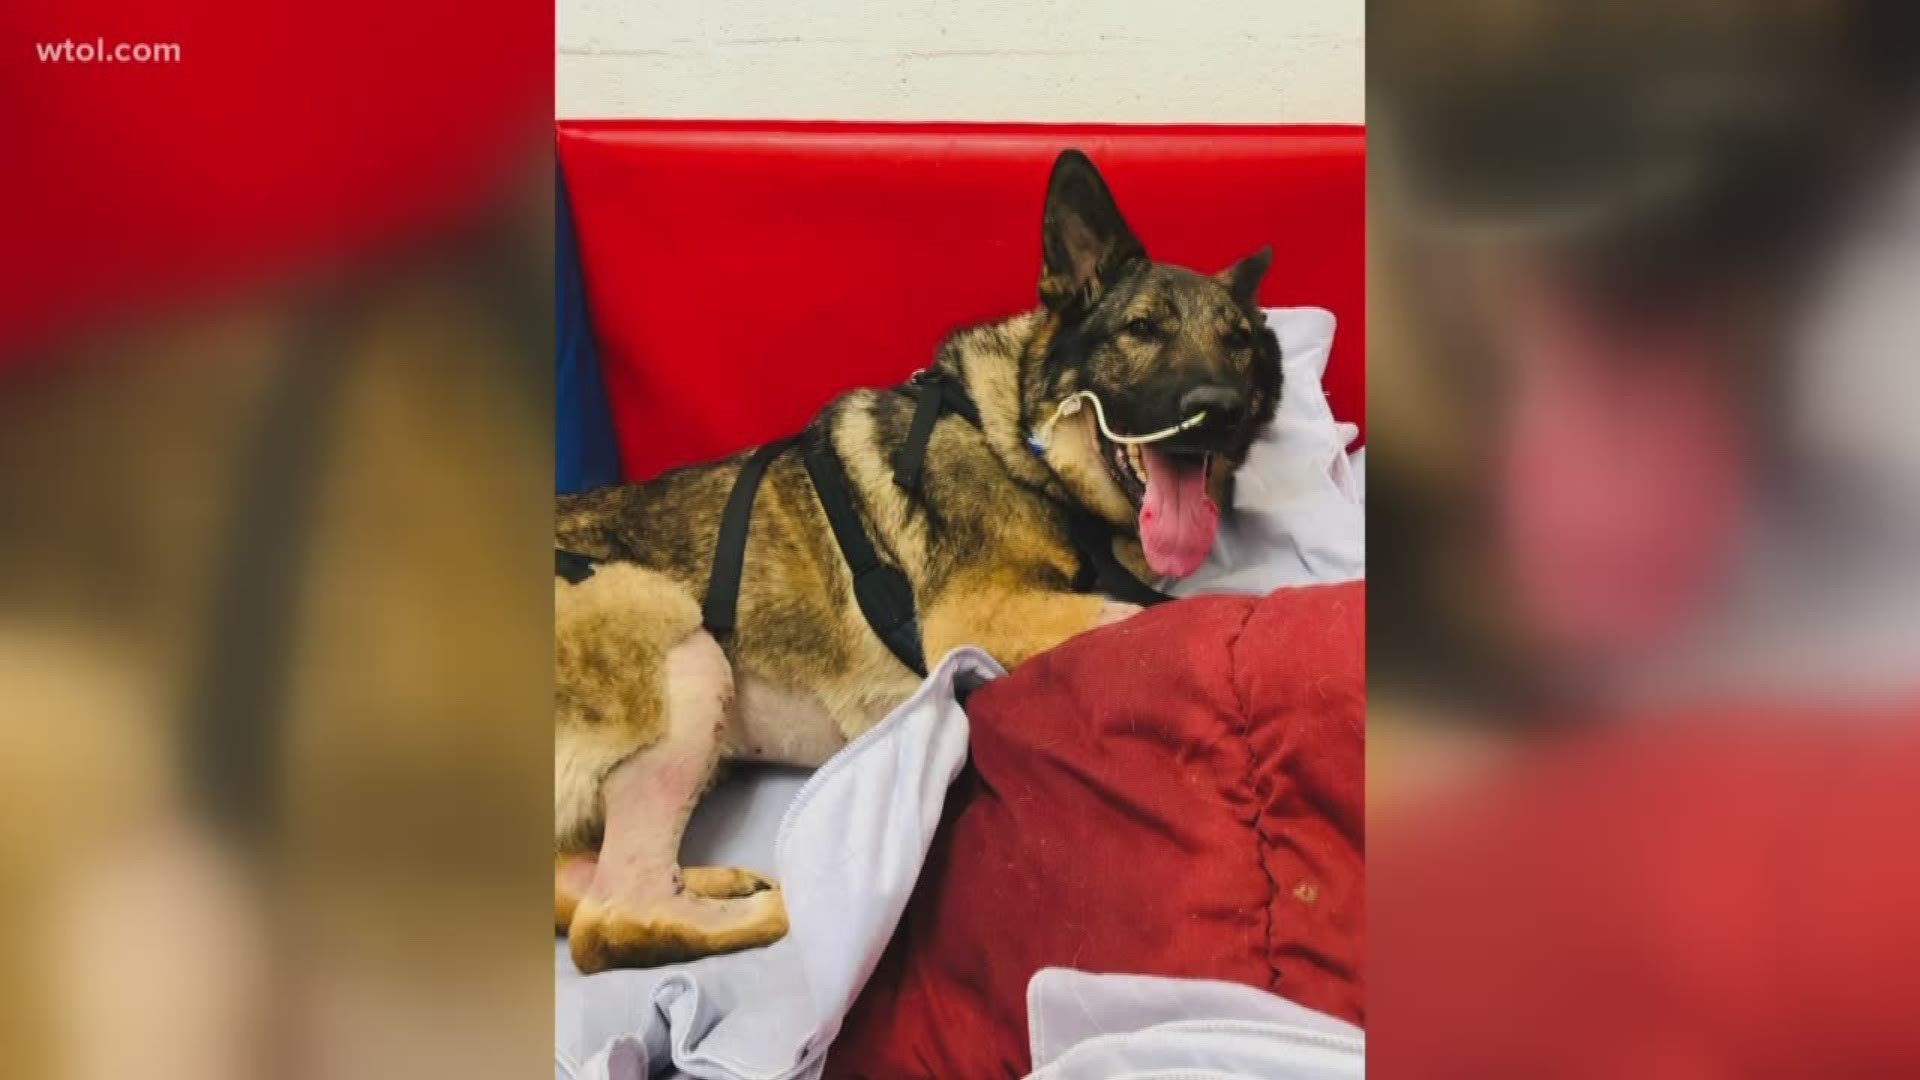 Zeus was almost put down by staff at Ohio State Medical Center, after suffering from bleeding around his heart and multiple seizures